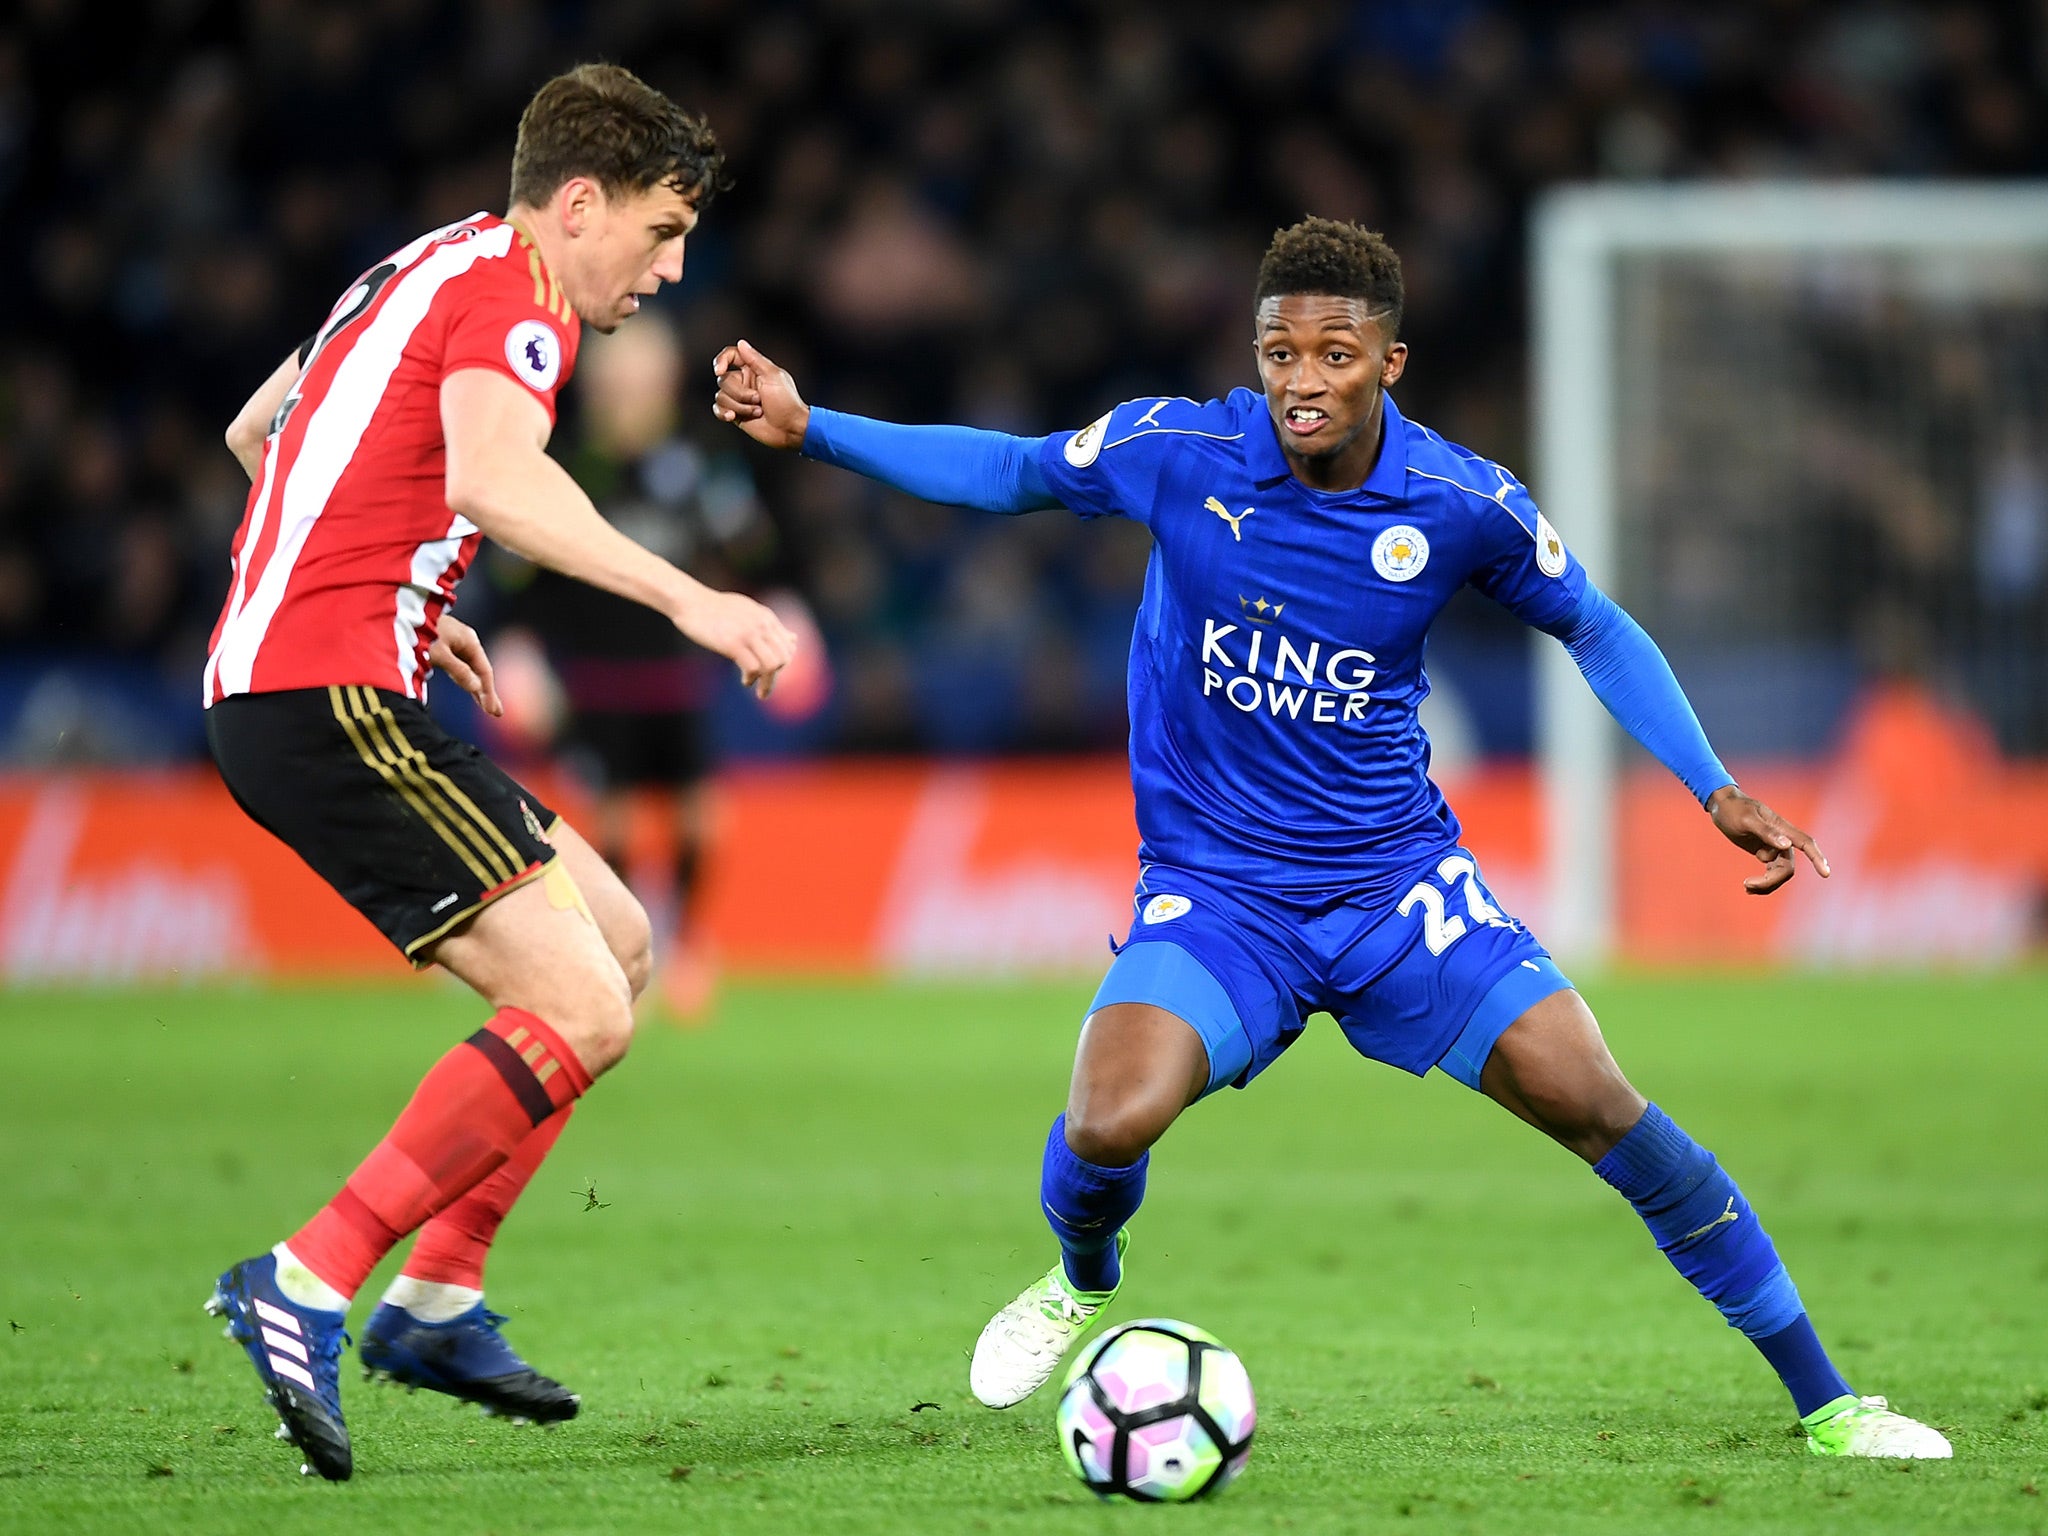 Demarai Gray was lively once again for Leicester